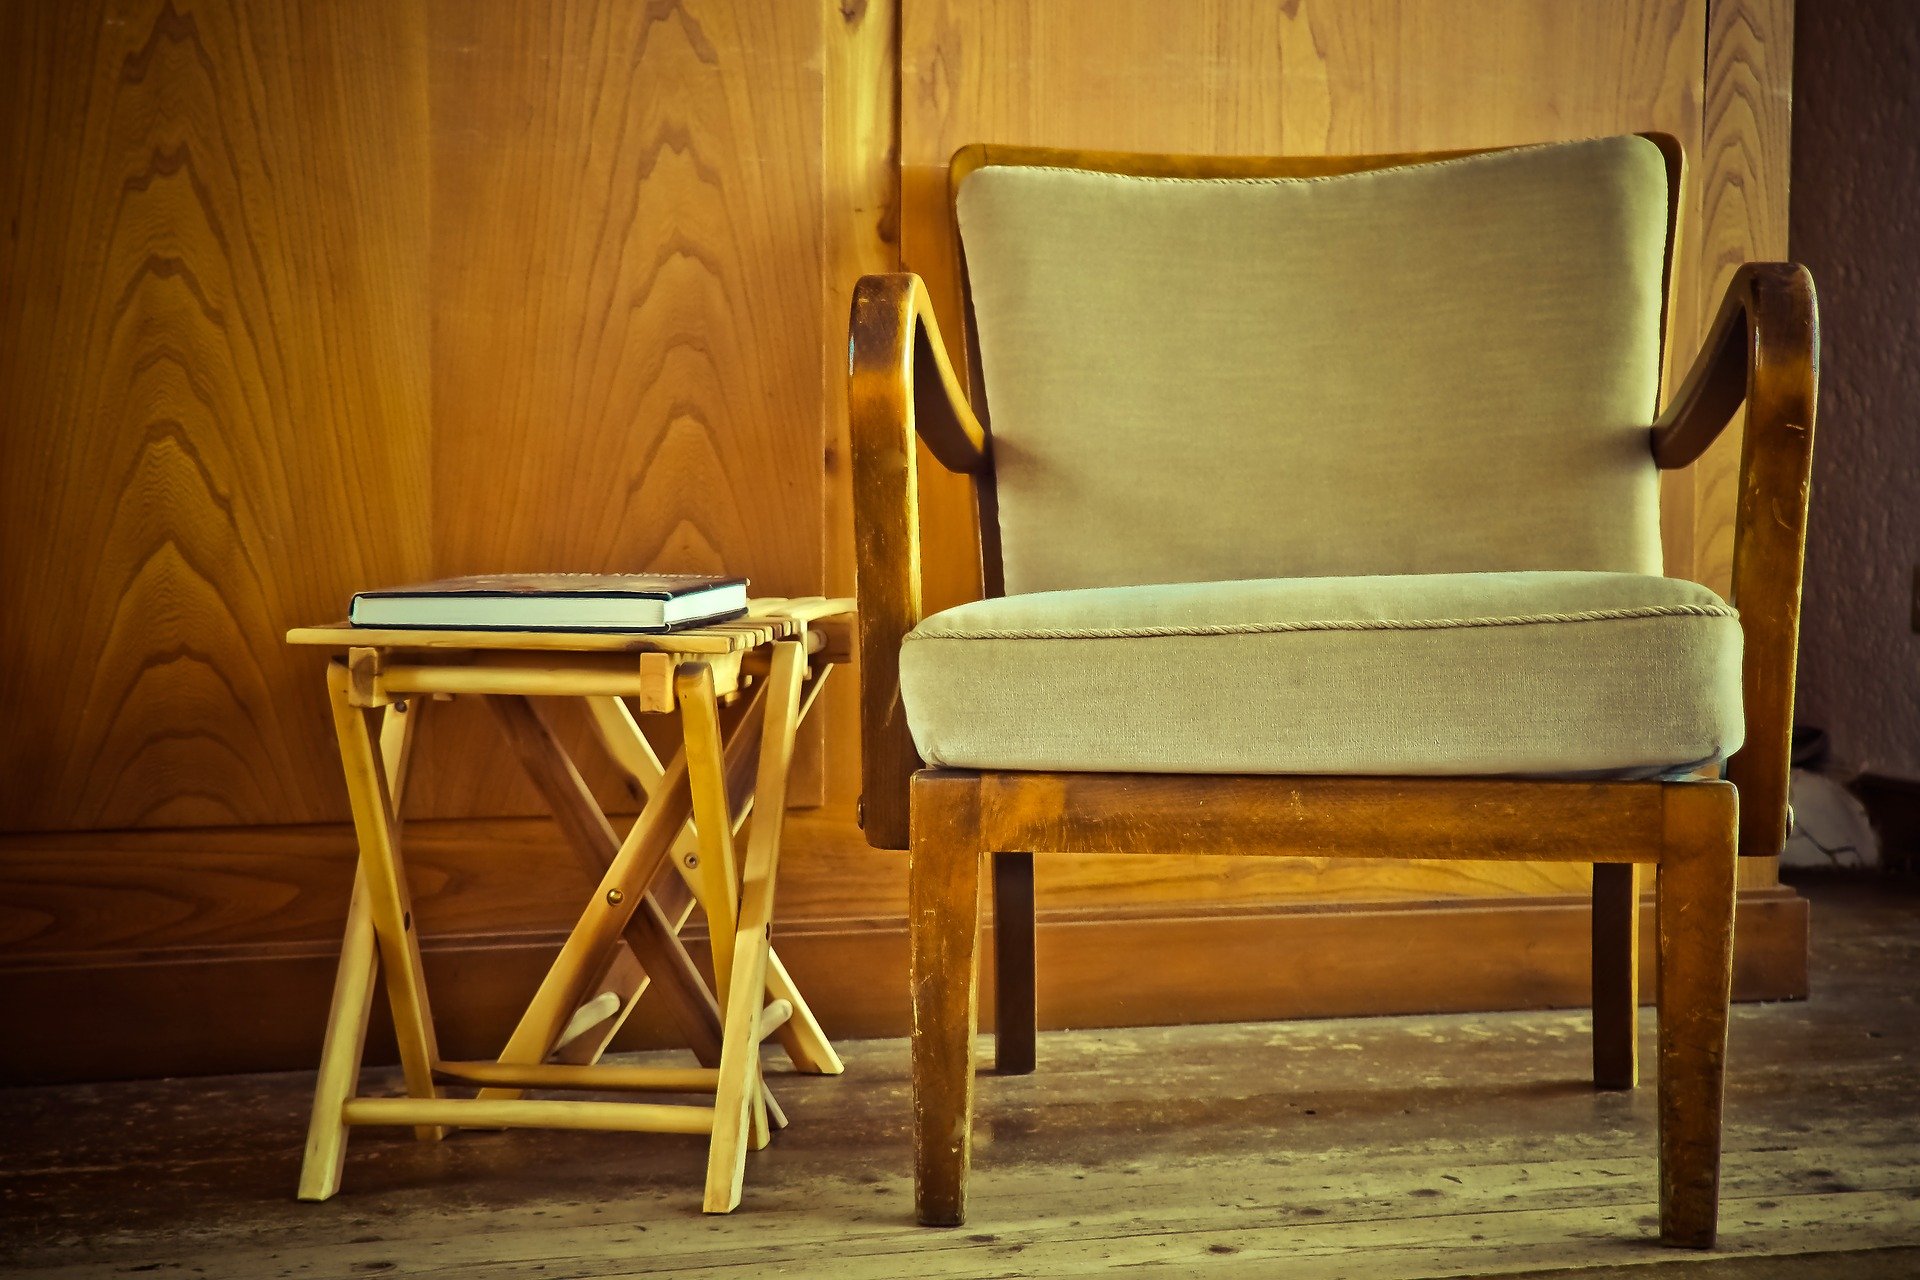 picture of an old fashioned chair and side table